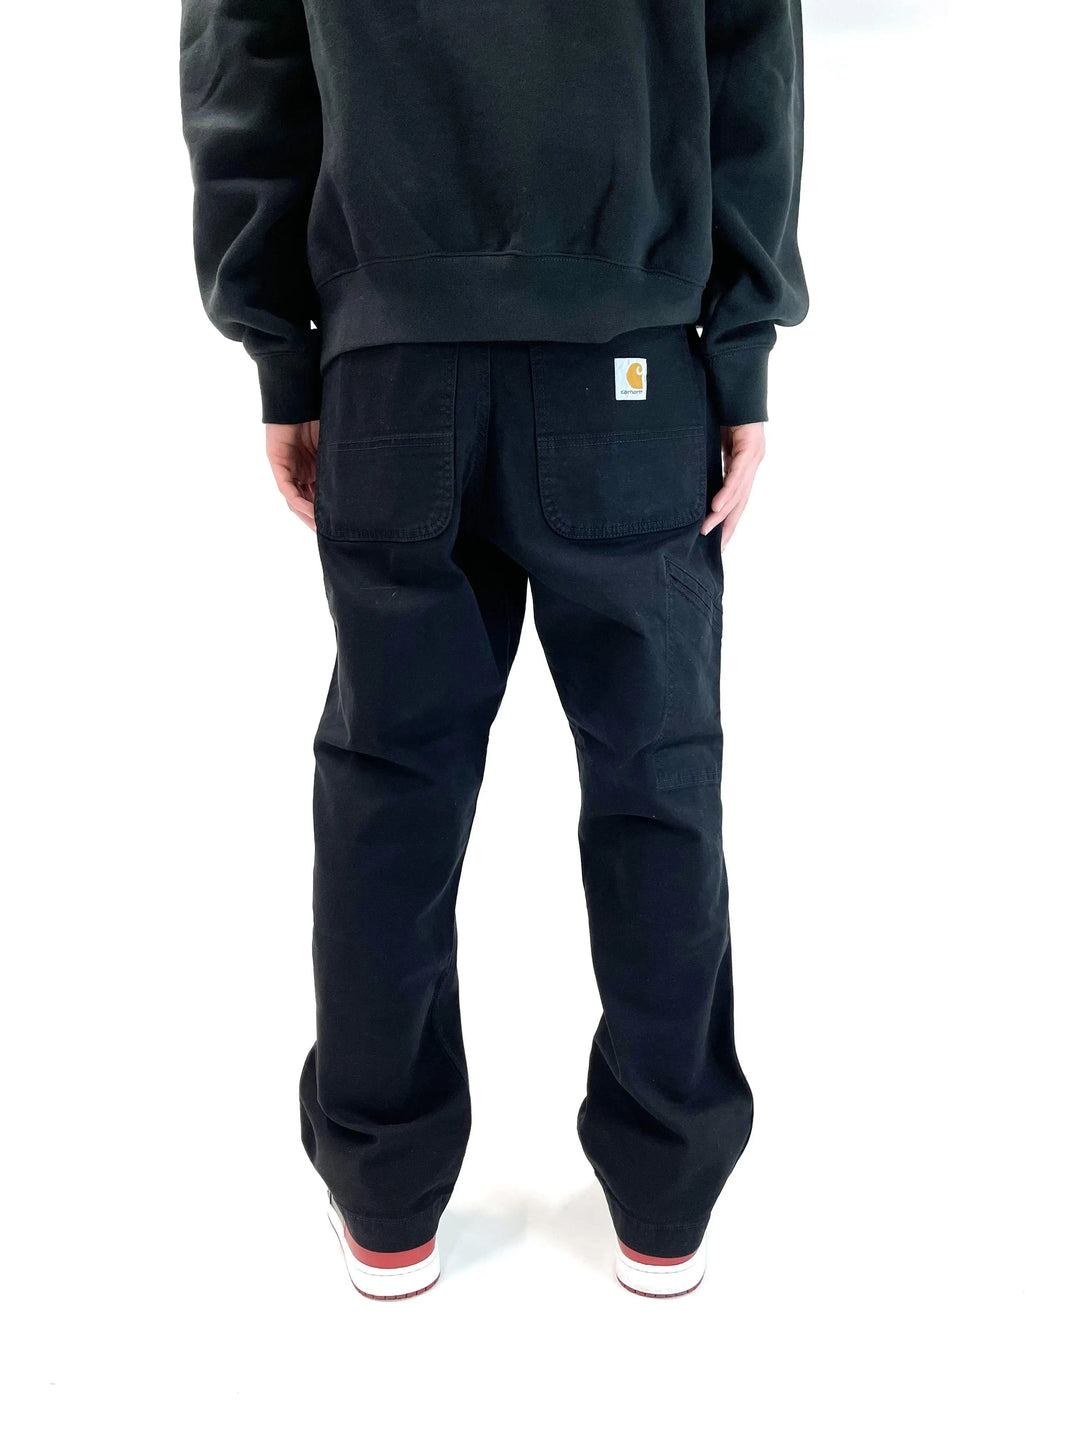 Carhartt Relaxed Fit Pant Black Prior